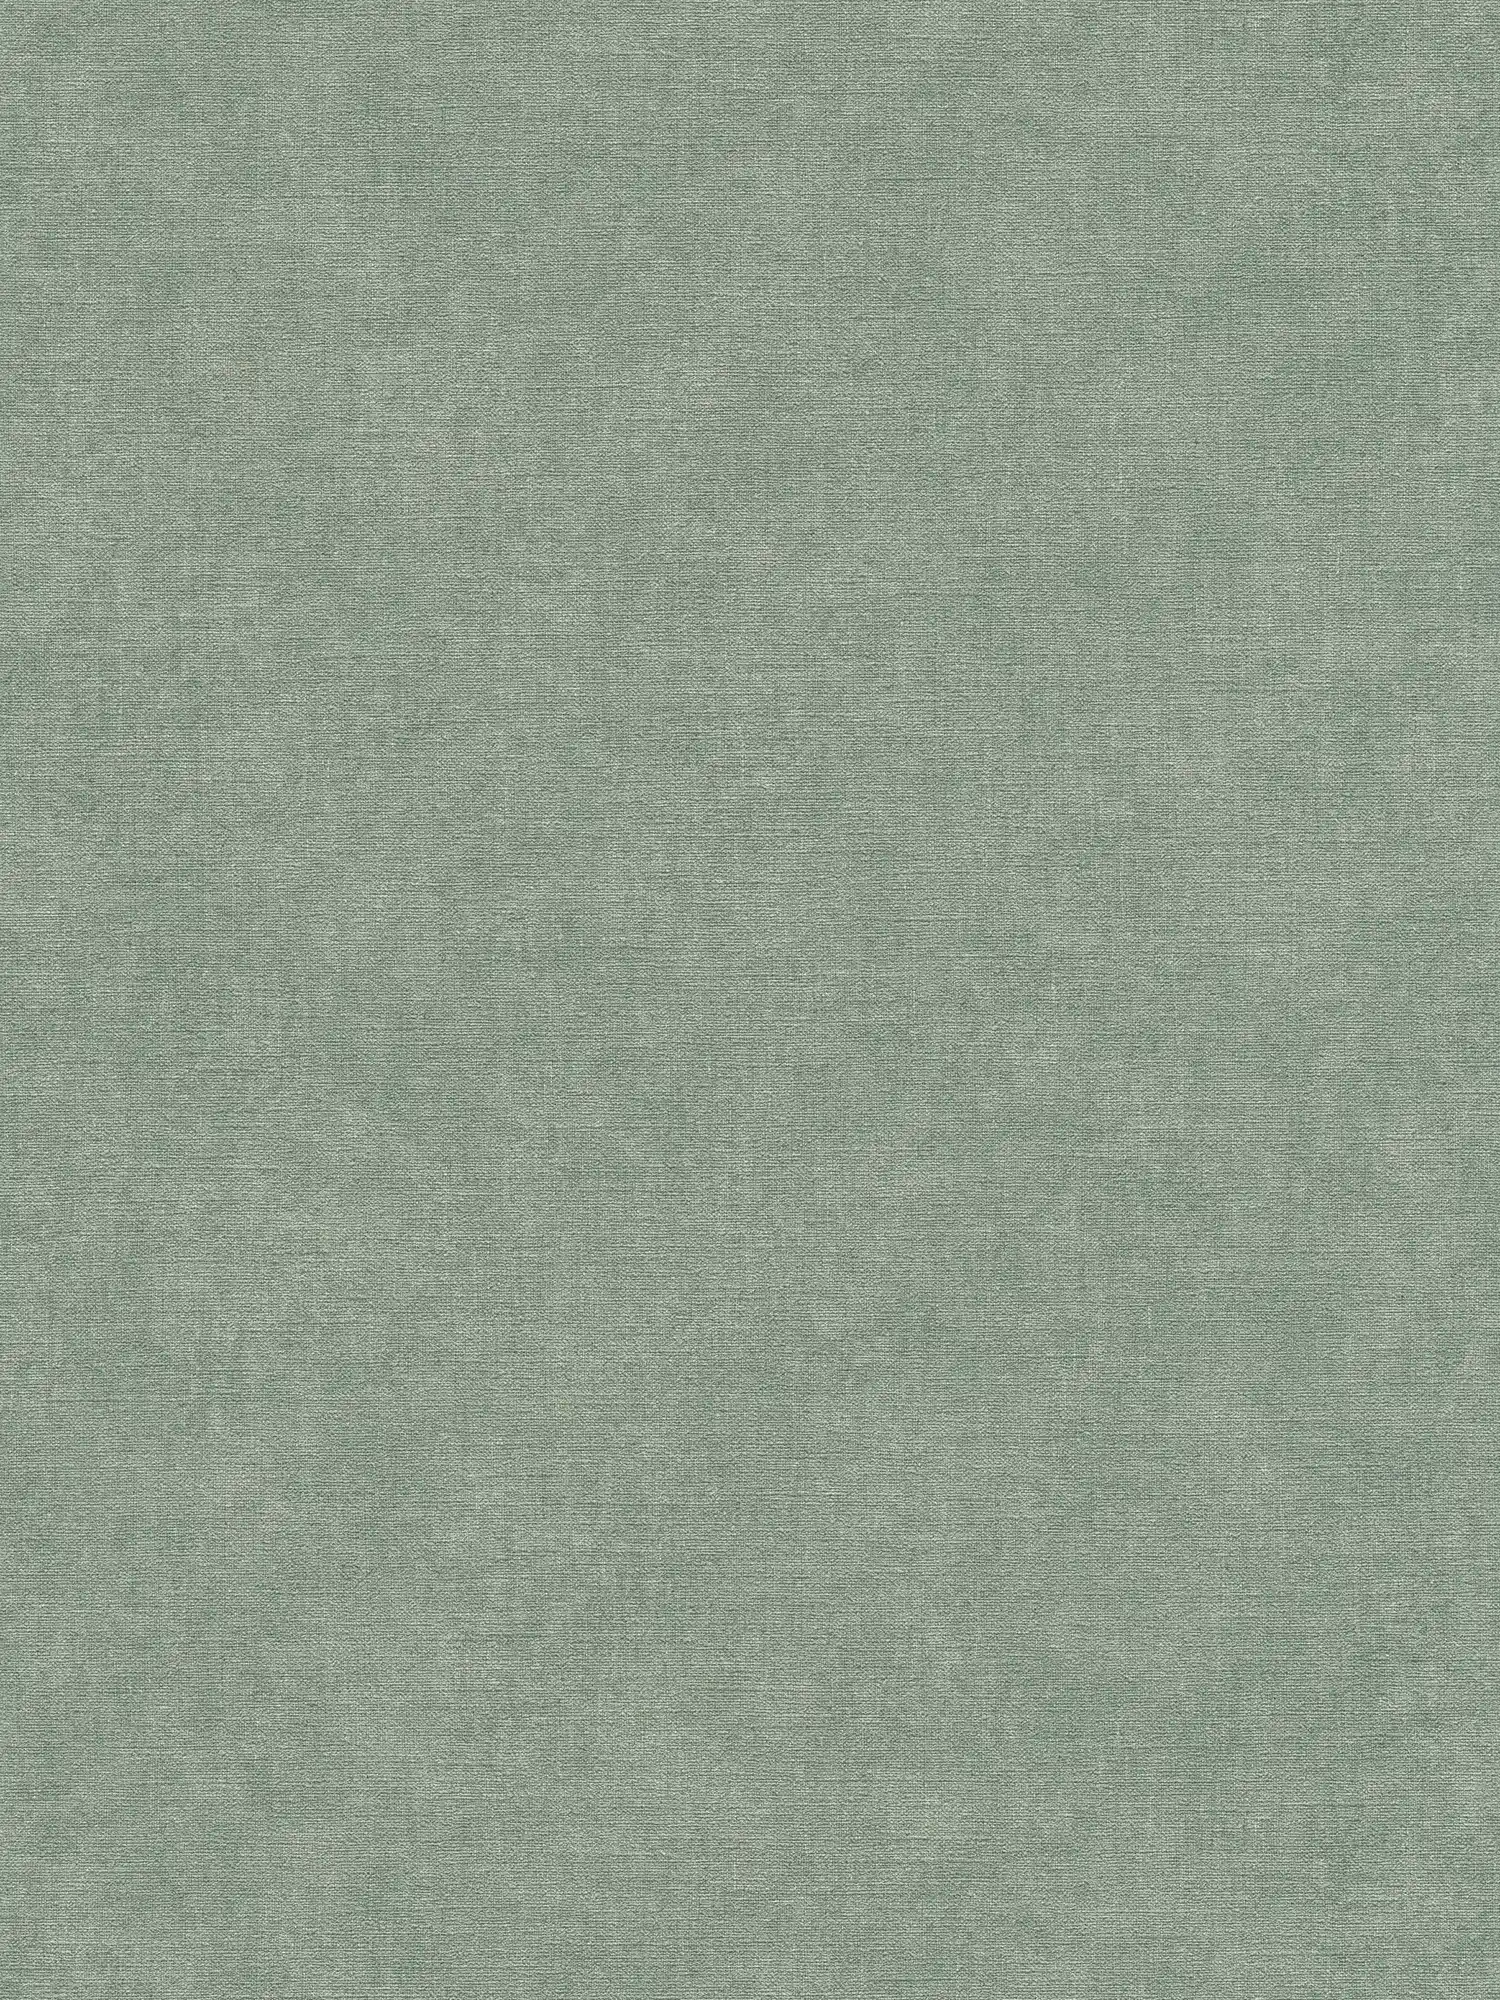 Lightly textured plain wallpaper in textile look - green, grey
